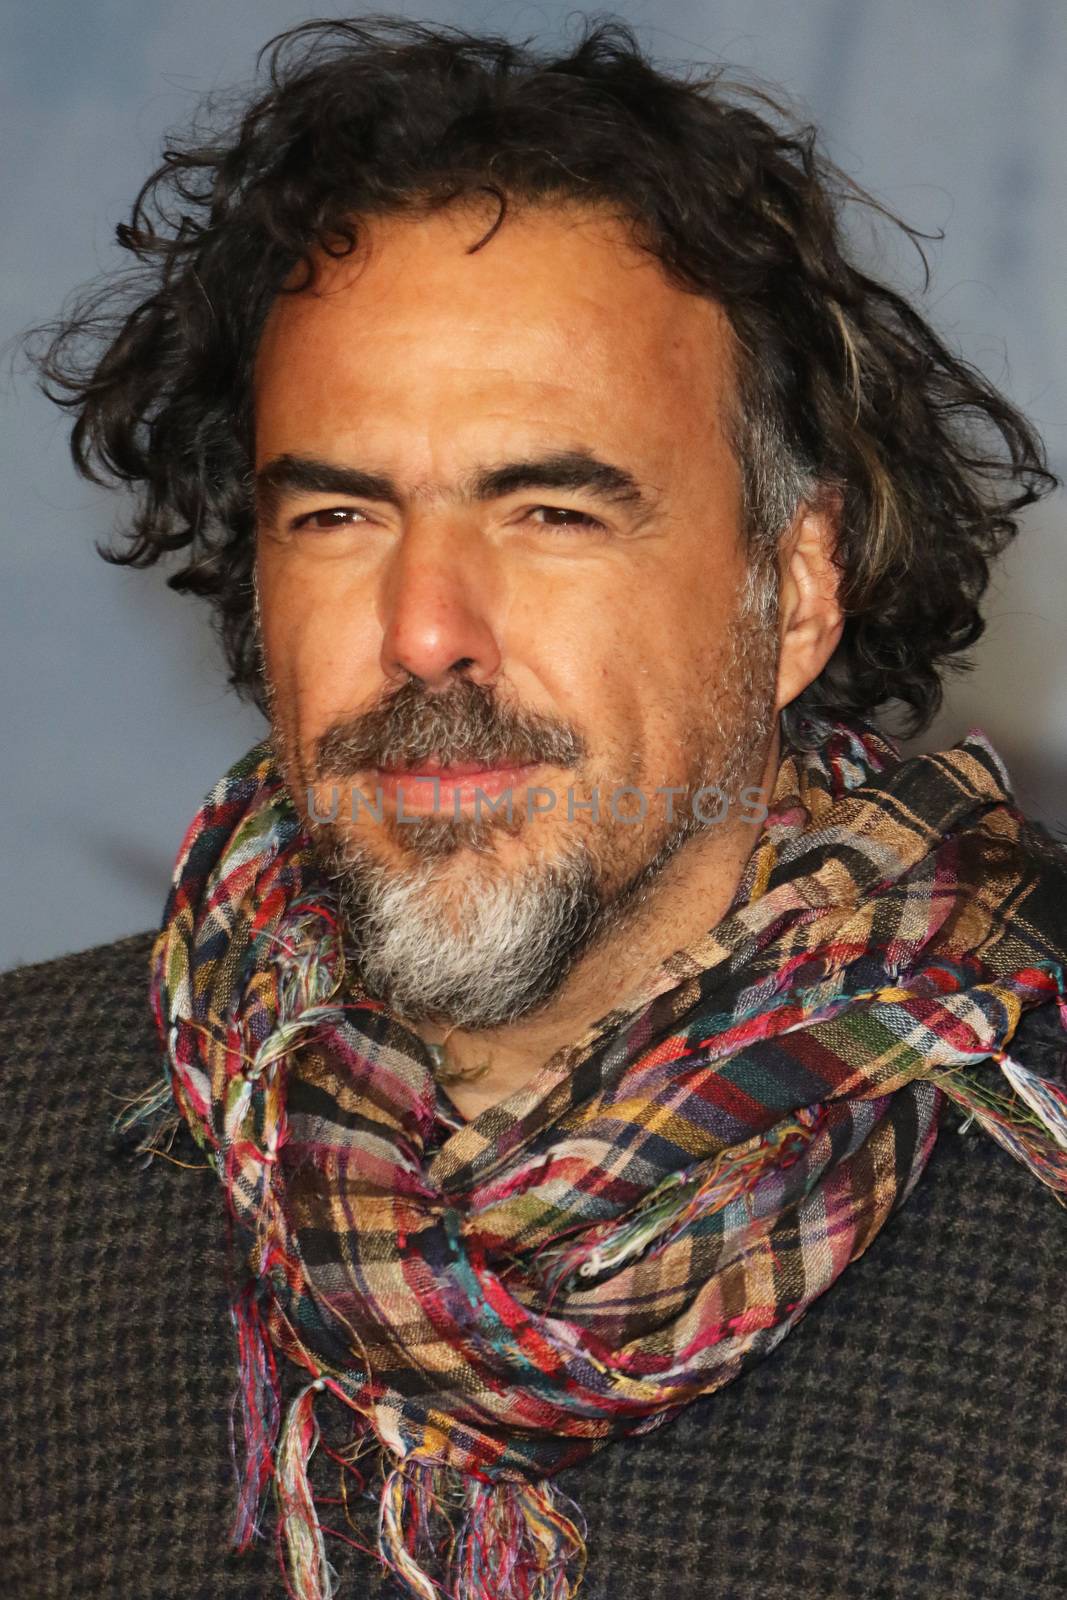 UK, London: Alejandro Gonzalez Inarritu arrives on the red carpet at Leicester Square in London on January 14, 2016 for the UK premiere of the Revenant, Inarritu's Oscar-nominated film starring Leonardo DiCaprio.